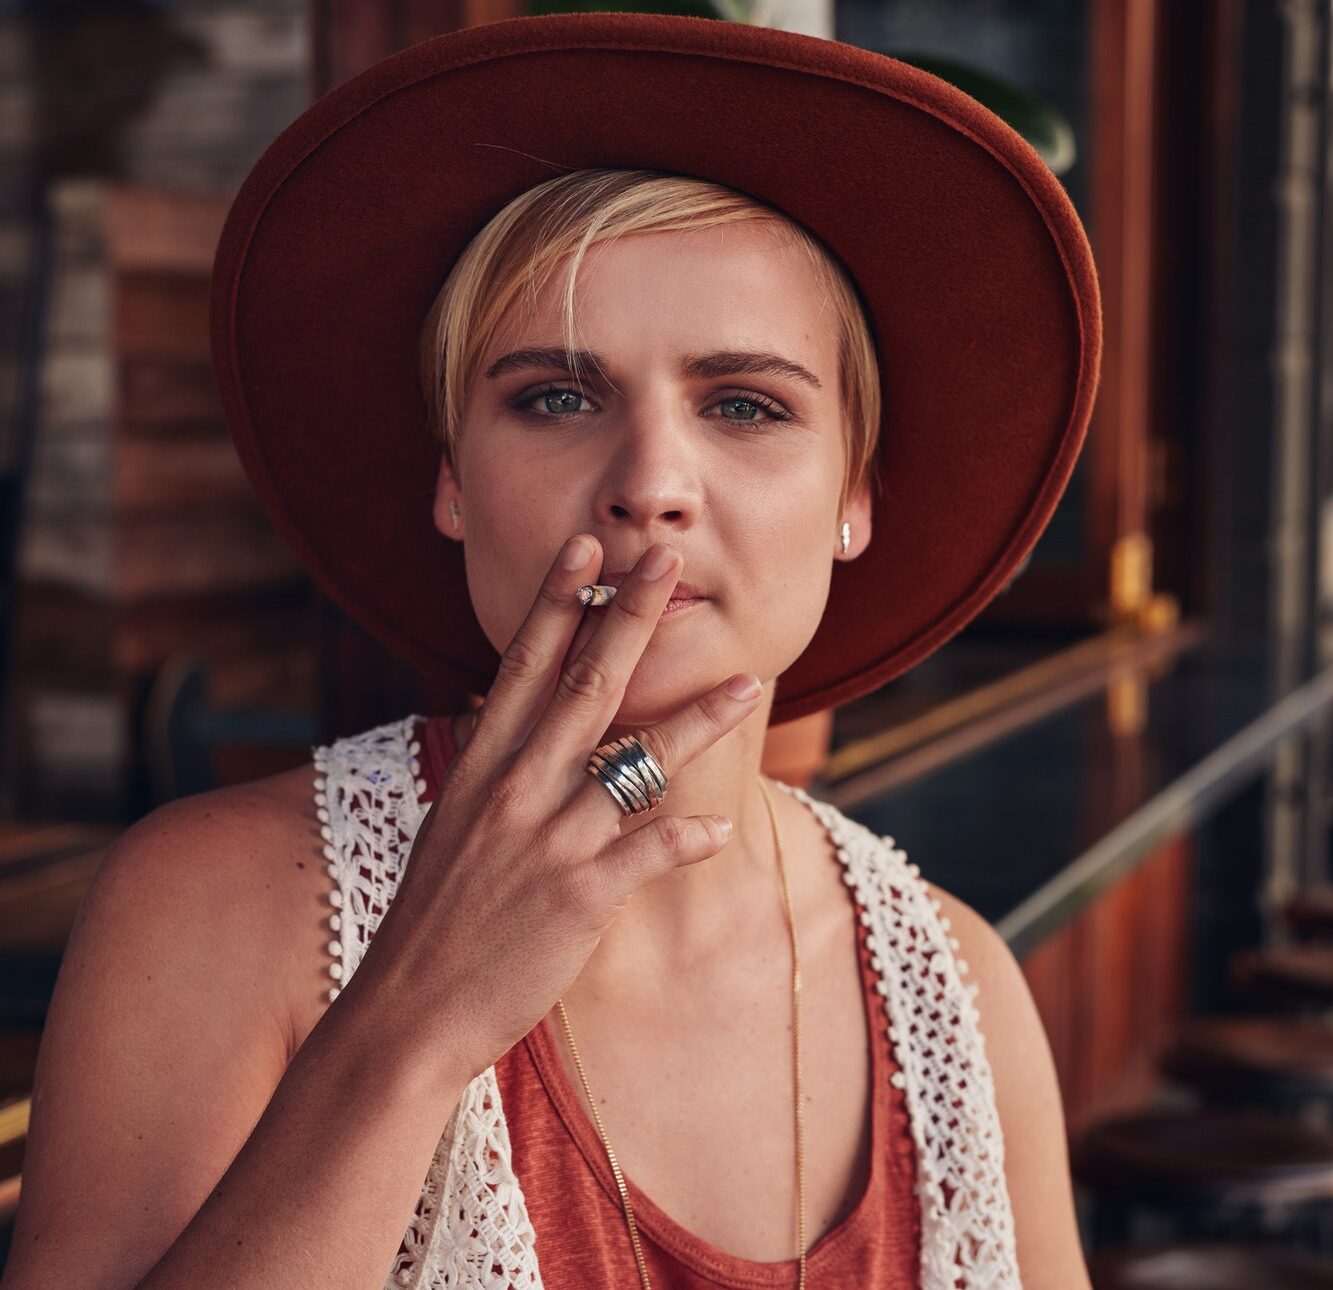 Young woman smoking a cigarette in coffee shop